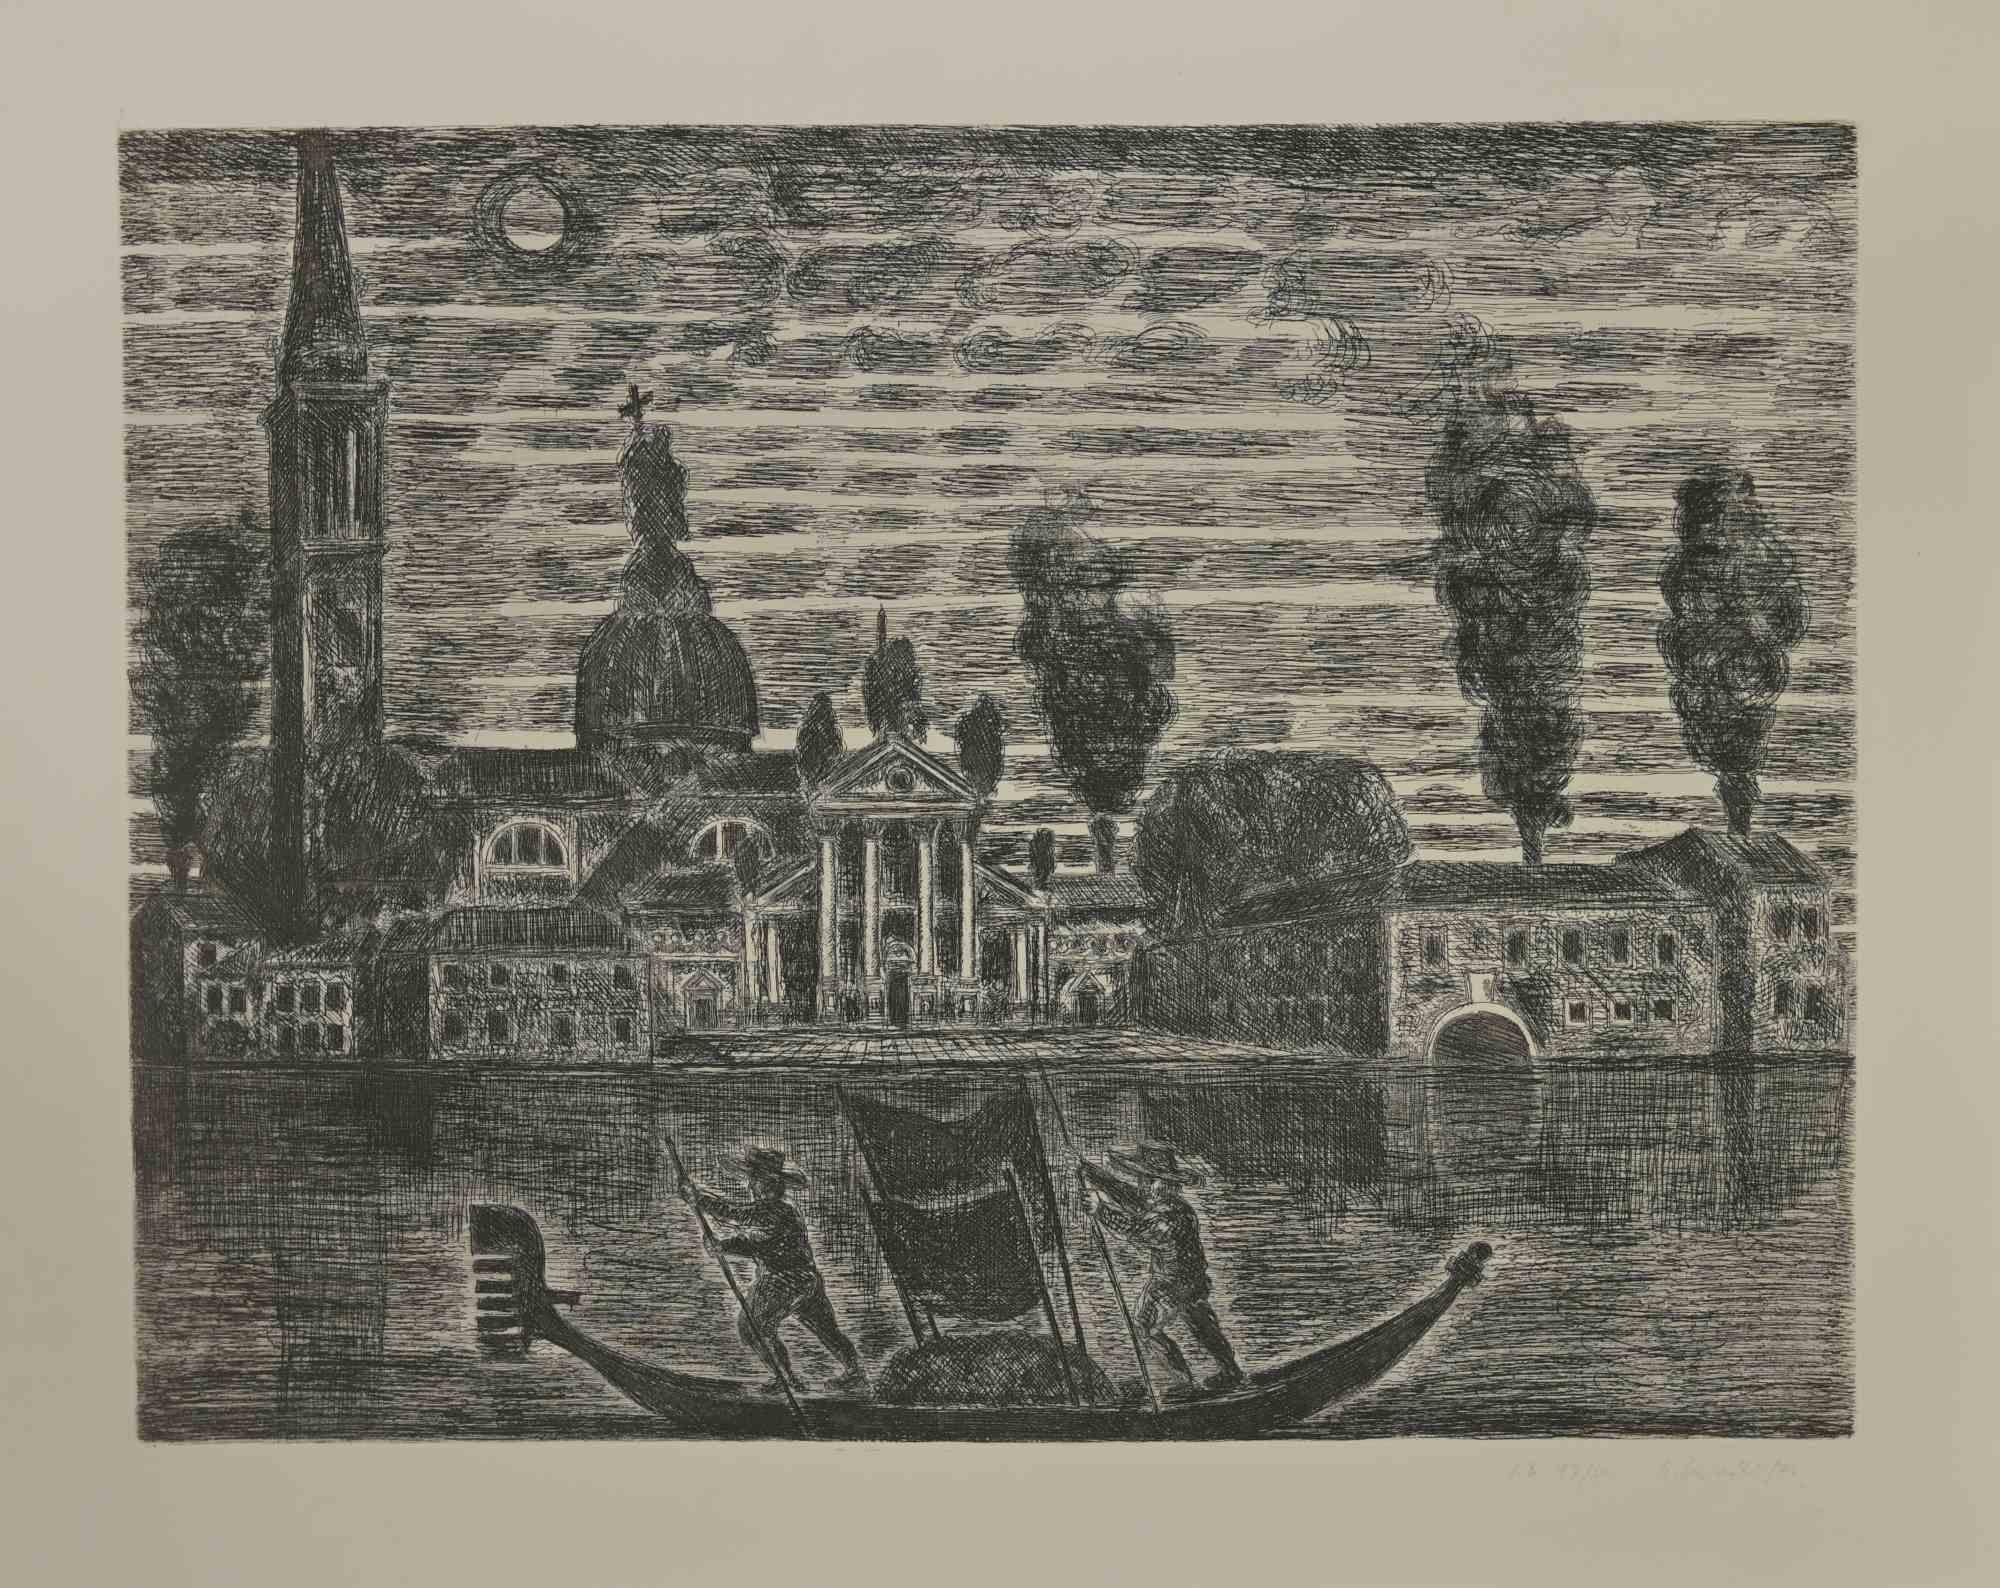 Gondoliers in Venice is an etching realized by Gianpaolo Berto in 1974.

60 X 75 cm , no frame.

Edition 17/50. Numbered and firmed by the artist in the lower margin.

Good conditions.

 

Gianpaolo Berto (1940) was born and raised in the